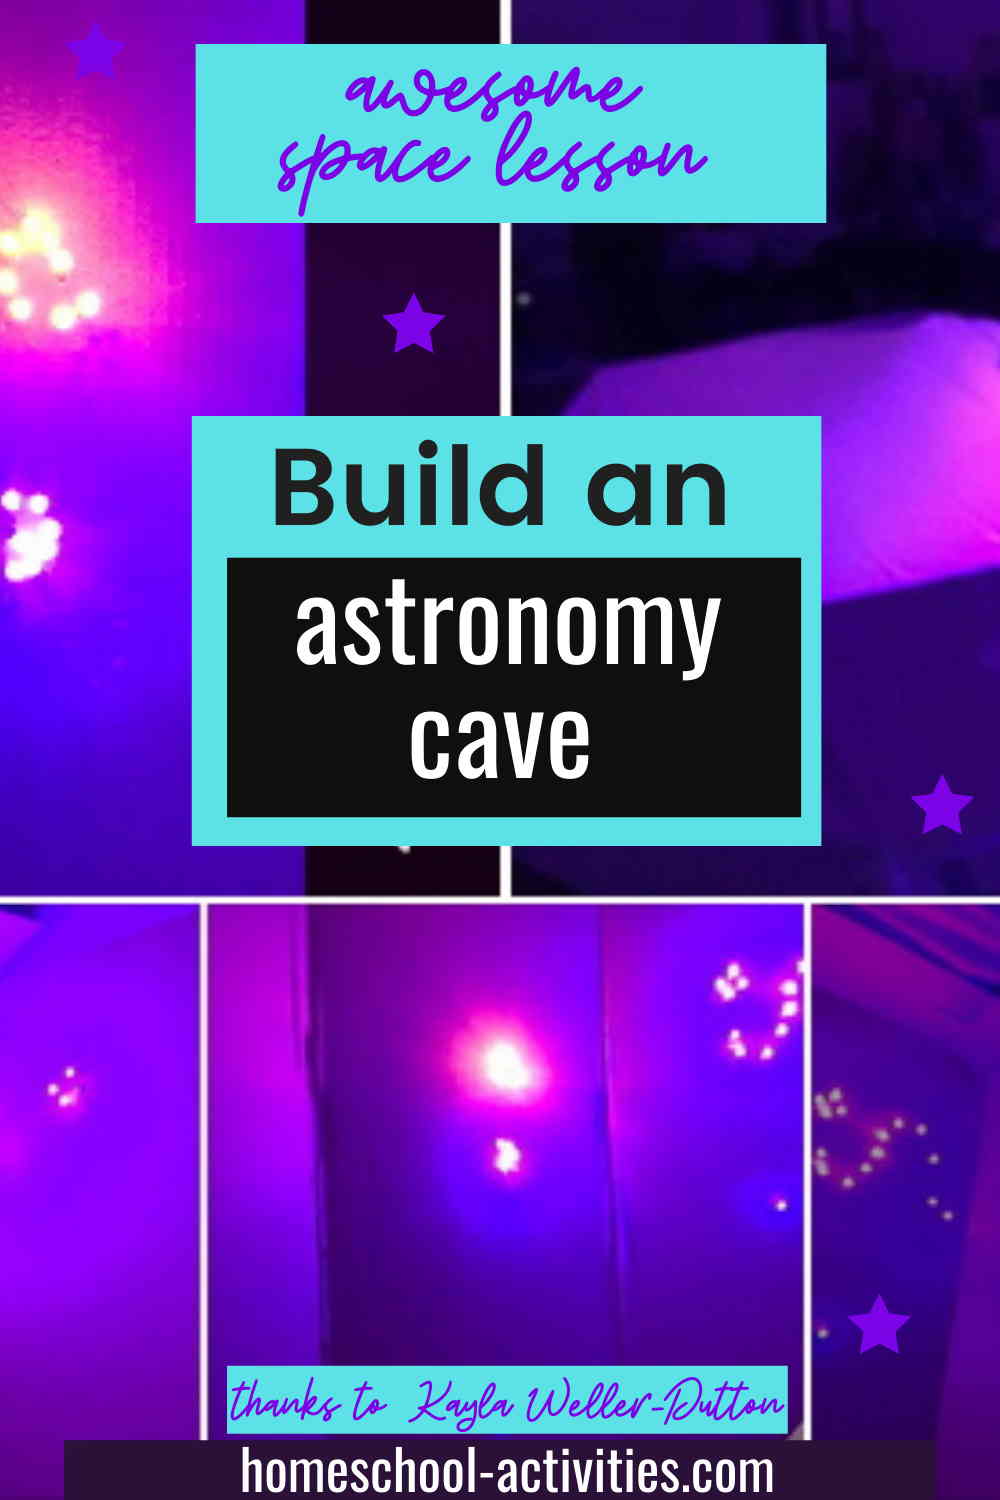 Build an astronomy cave with star constellations